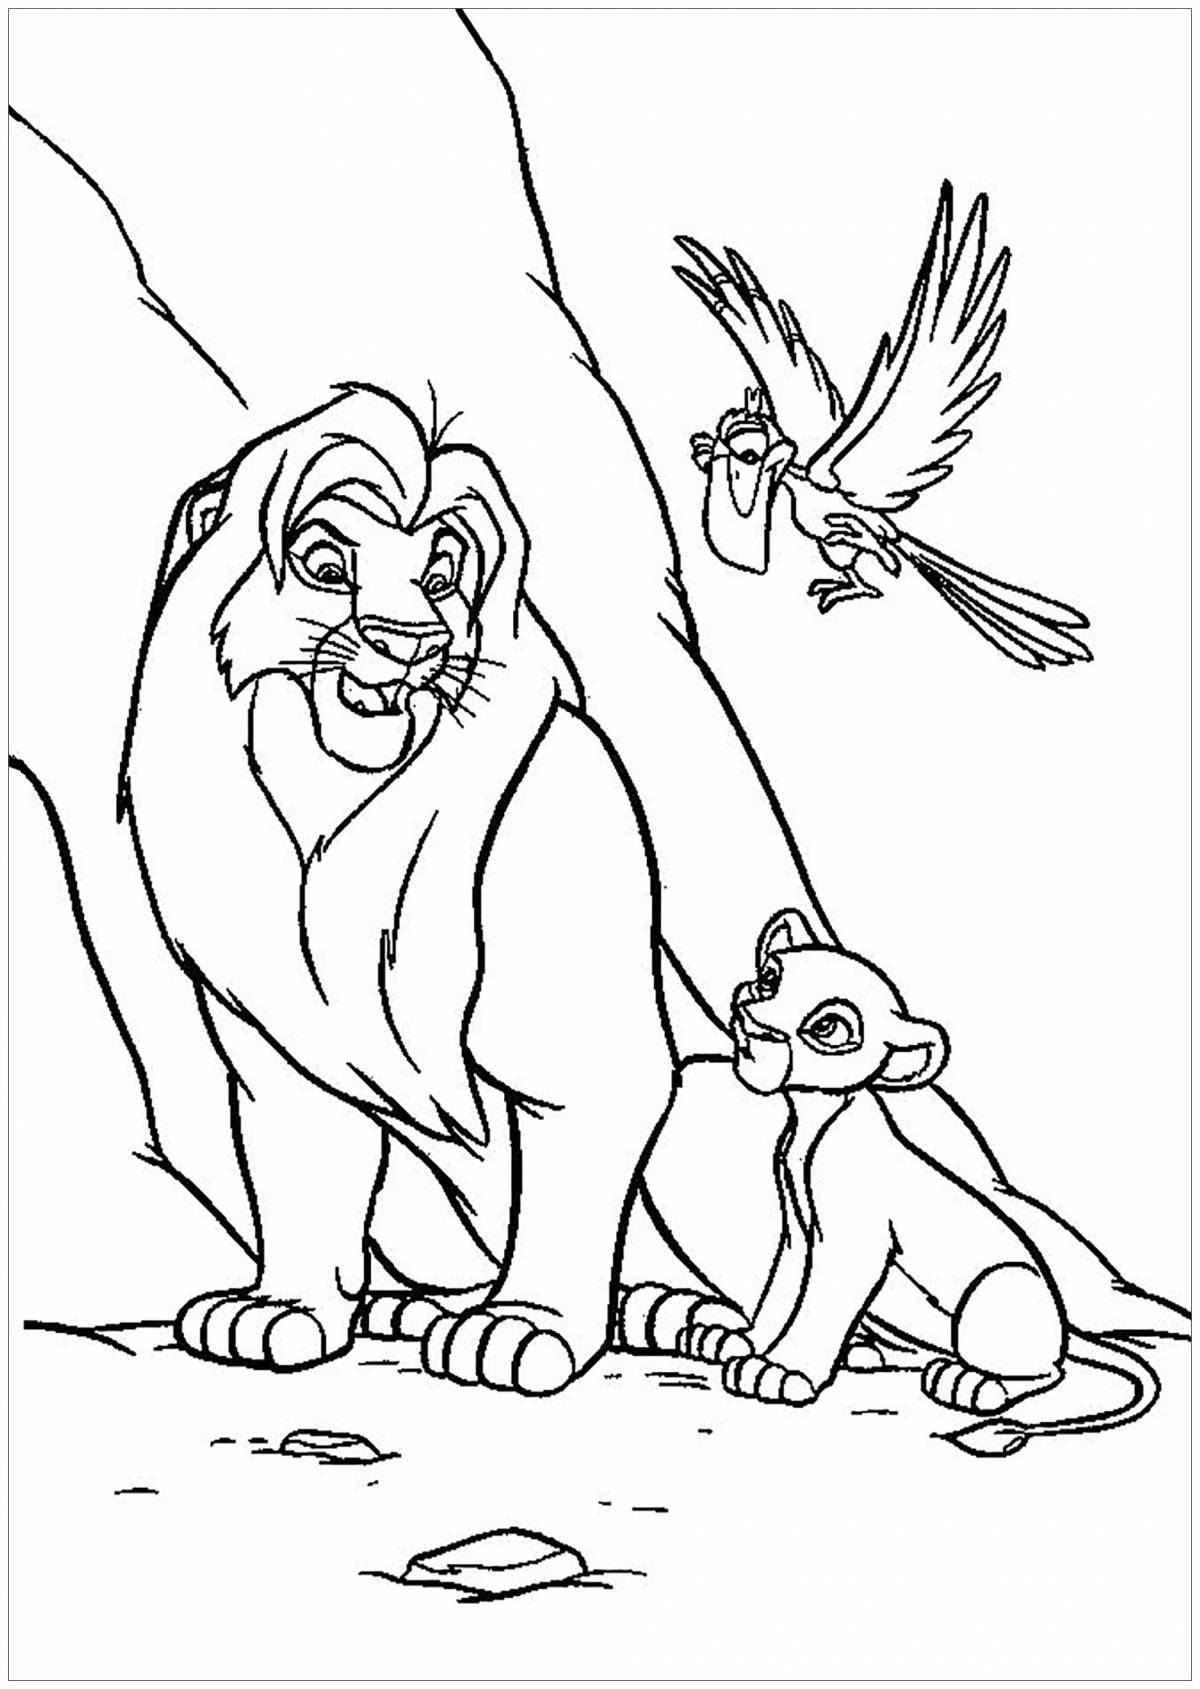 Animated lion king coloring page for kids